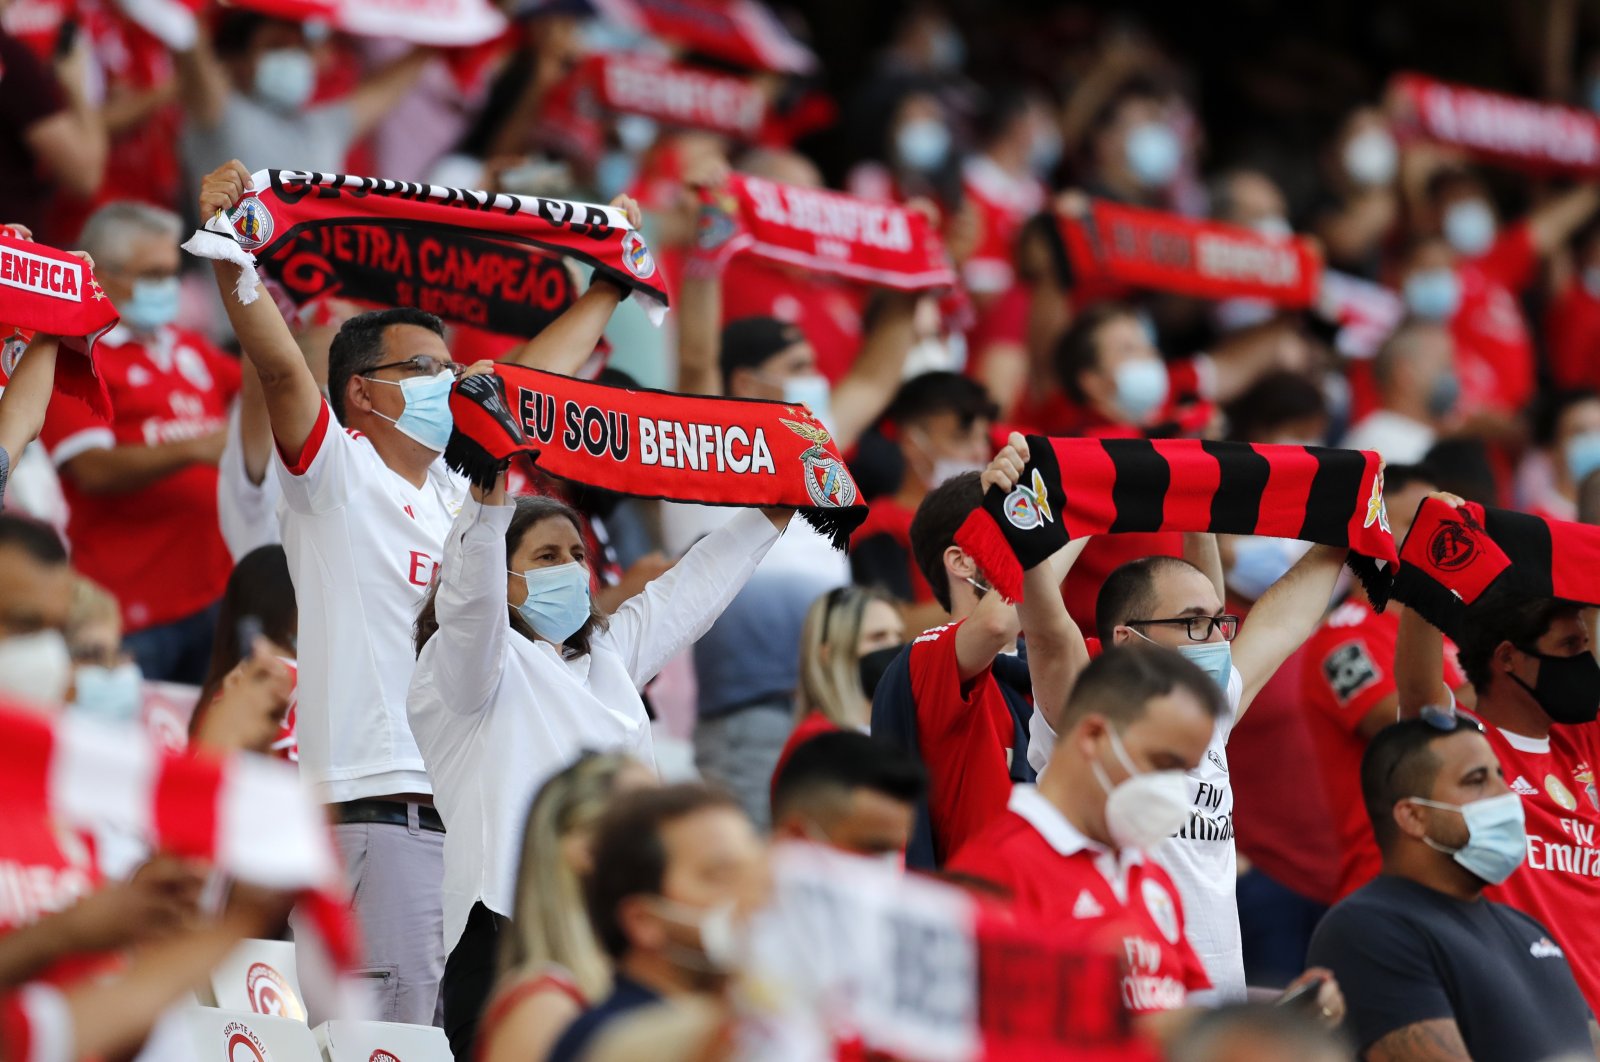 Benfica fans support their team during a Champions League qualifier against Spartak Moscow at the Luz stadium in Lisbon, Portugal, Aug. 10, 2021. (AP Photo)